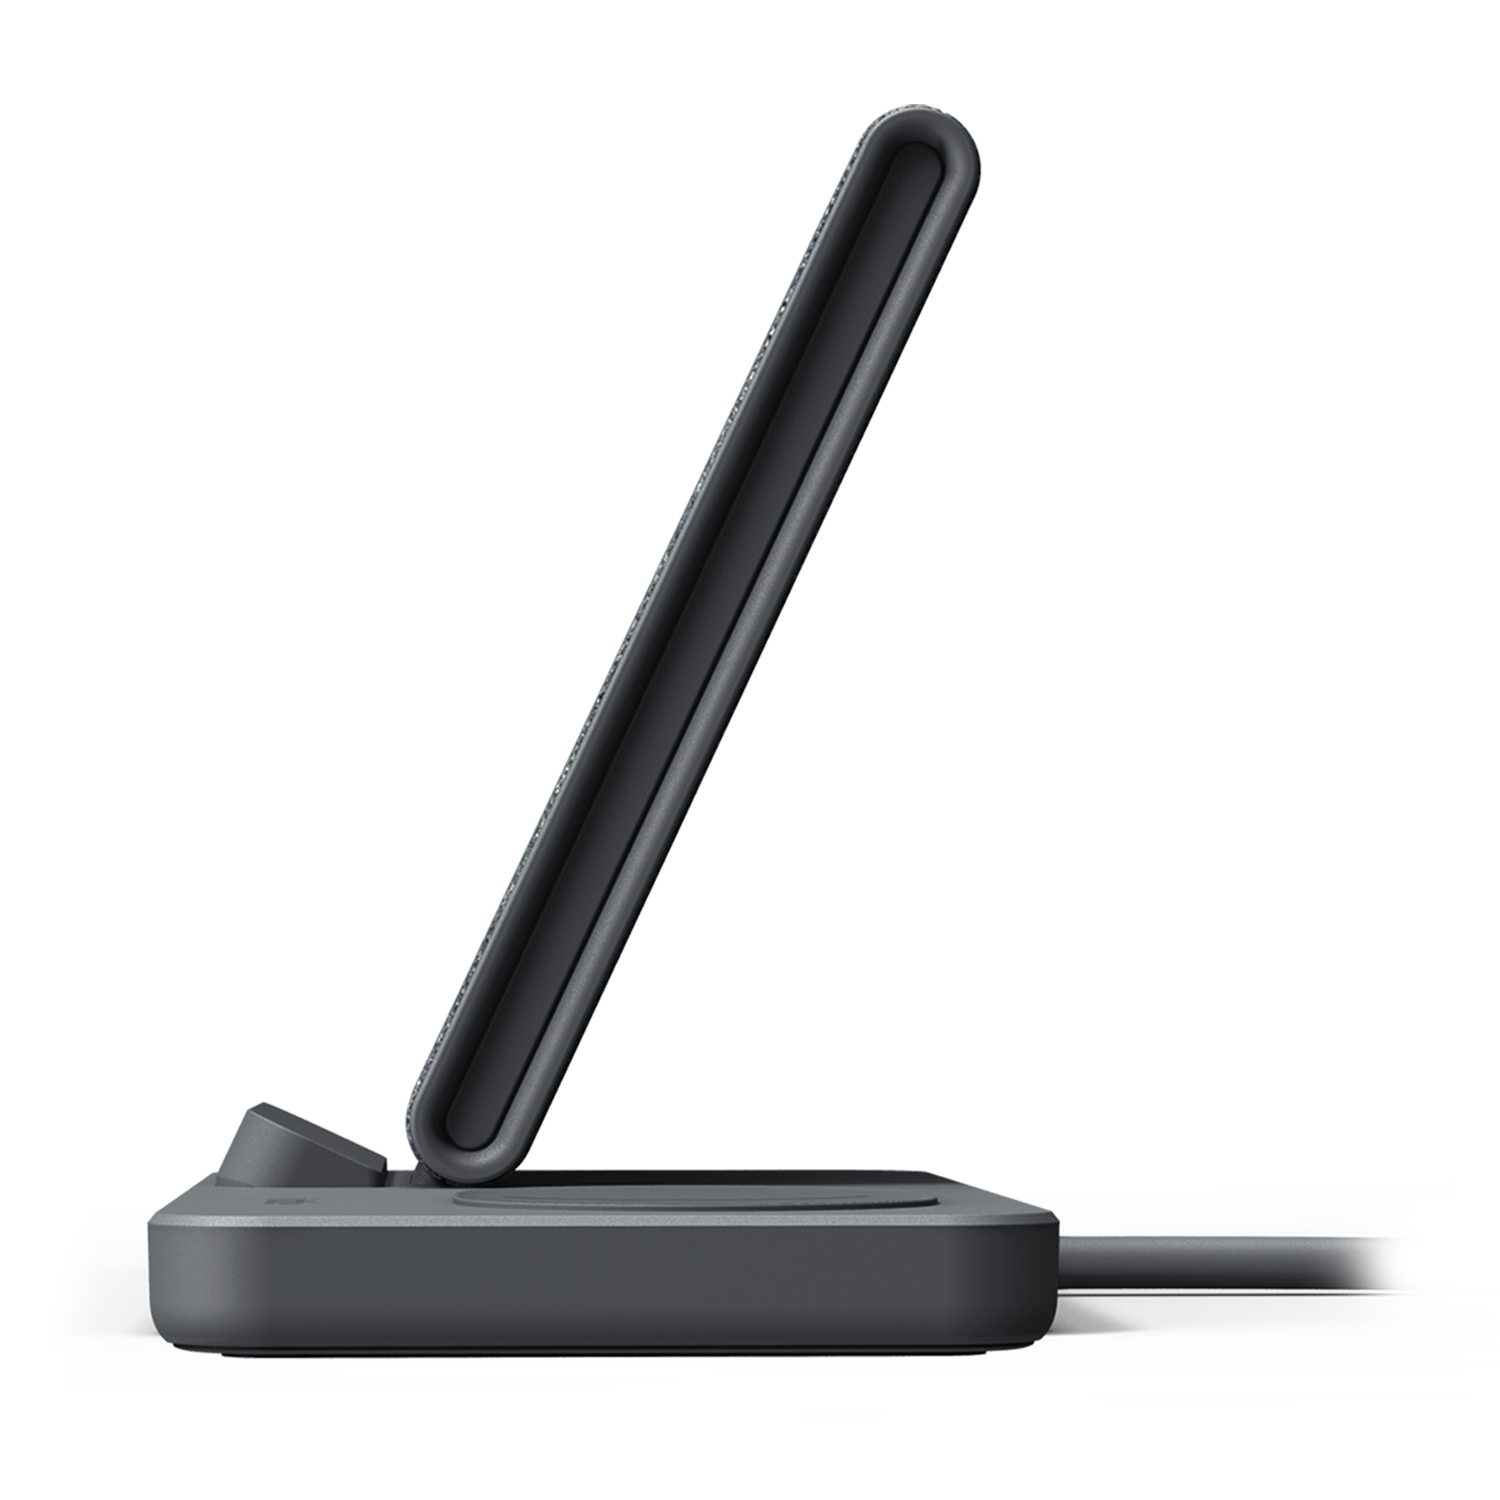 Duo Wireless Charger Power Stand